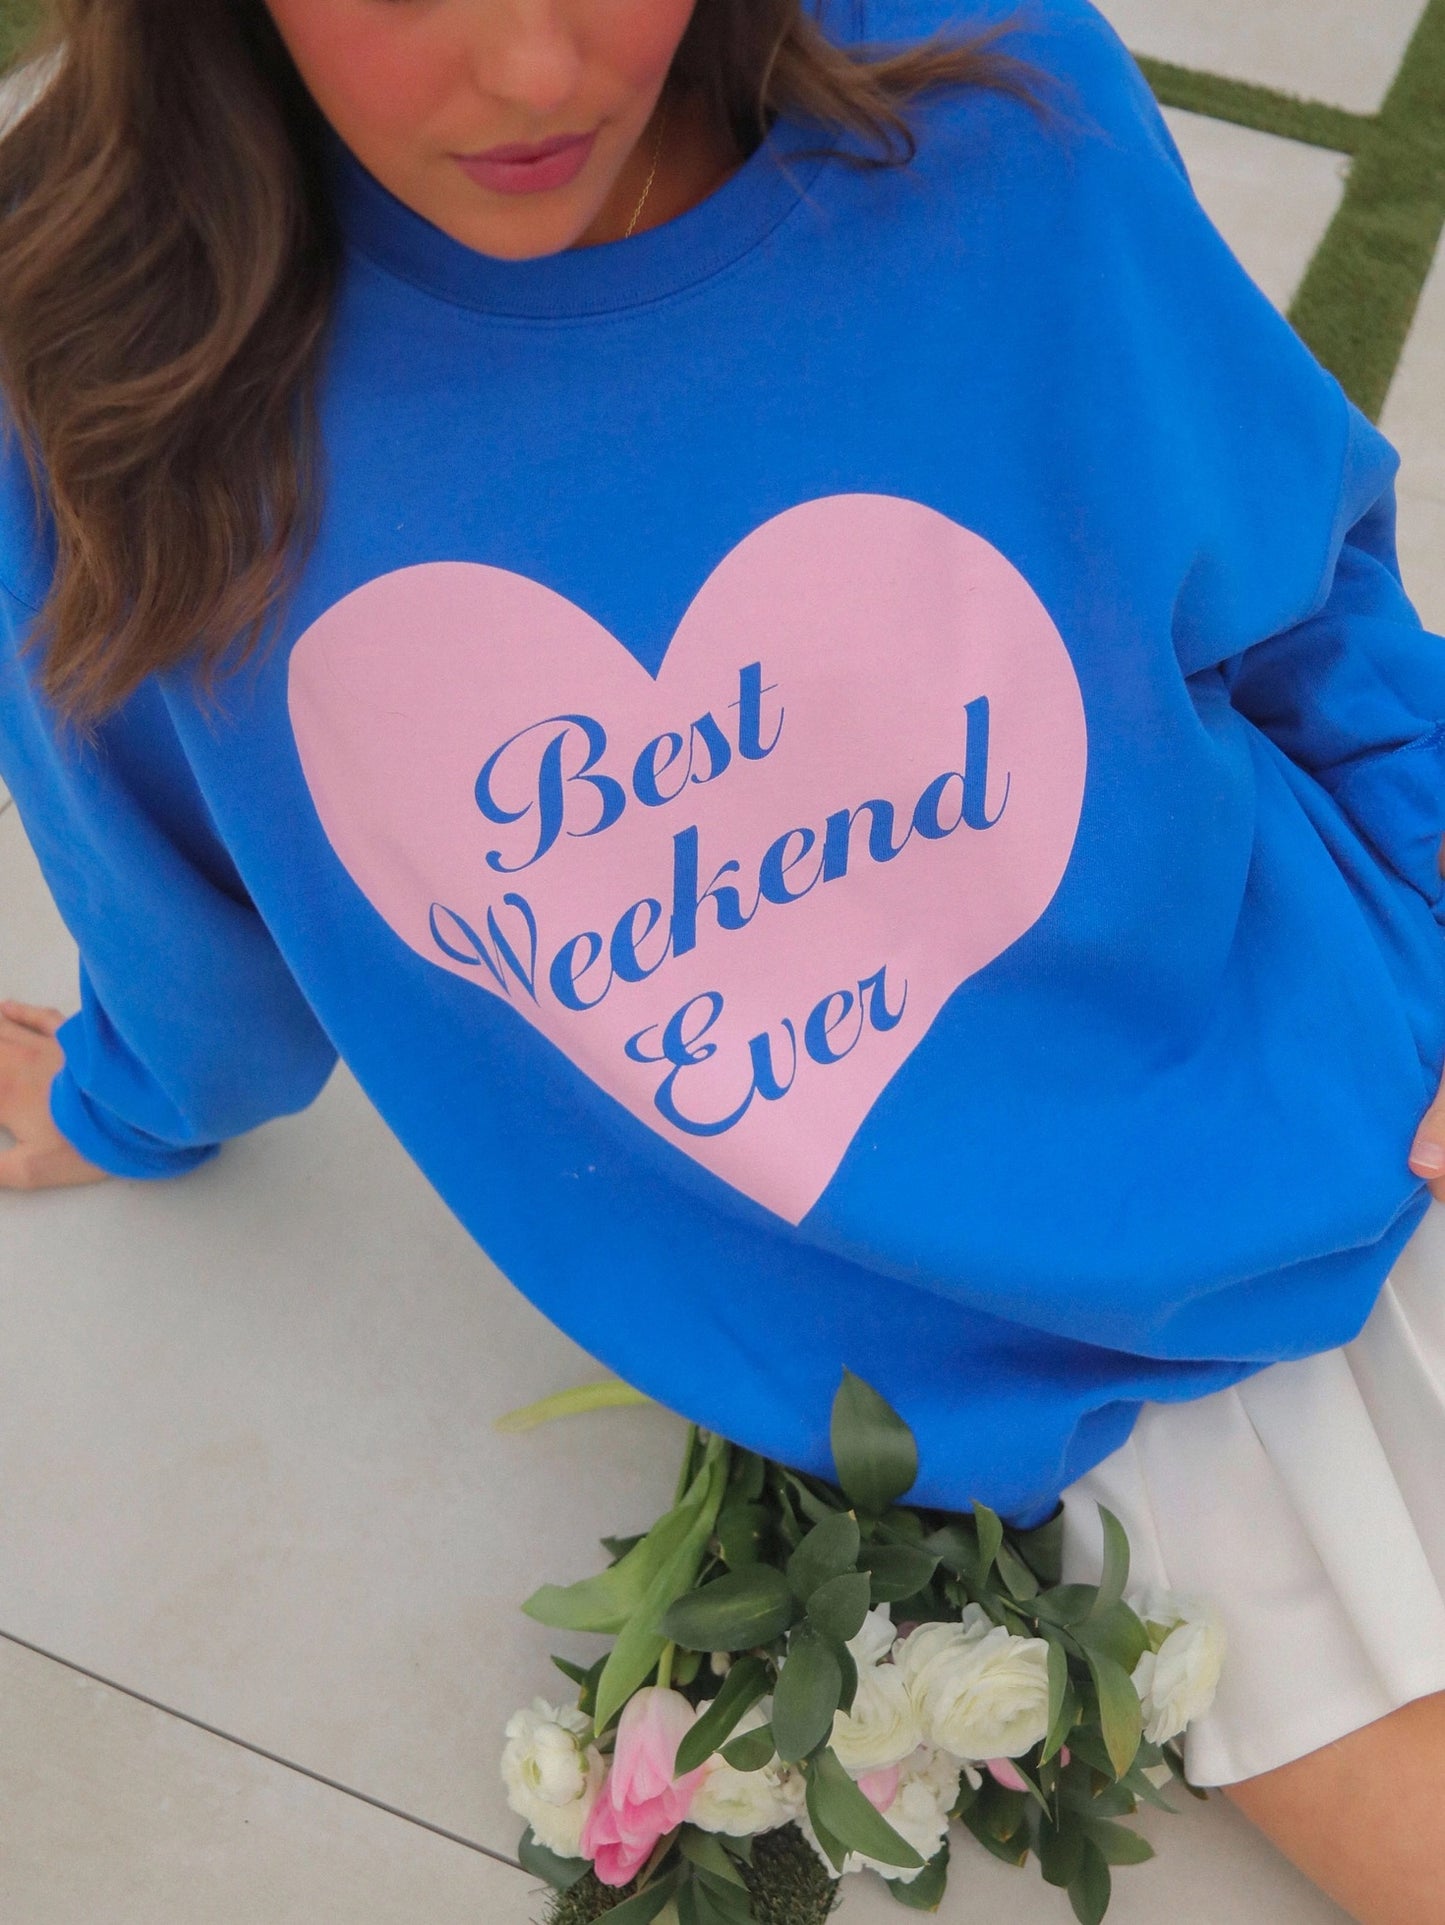 Blue Sweatshirt With Pink Heart That Says Best Weekend Ever